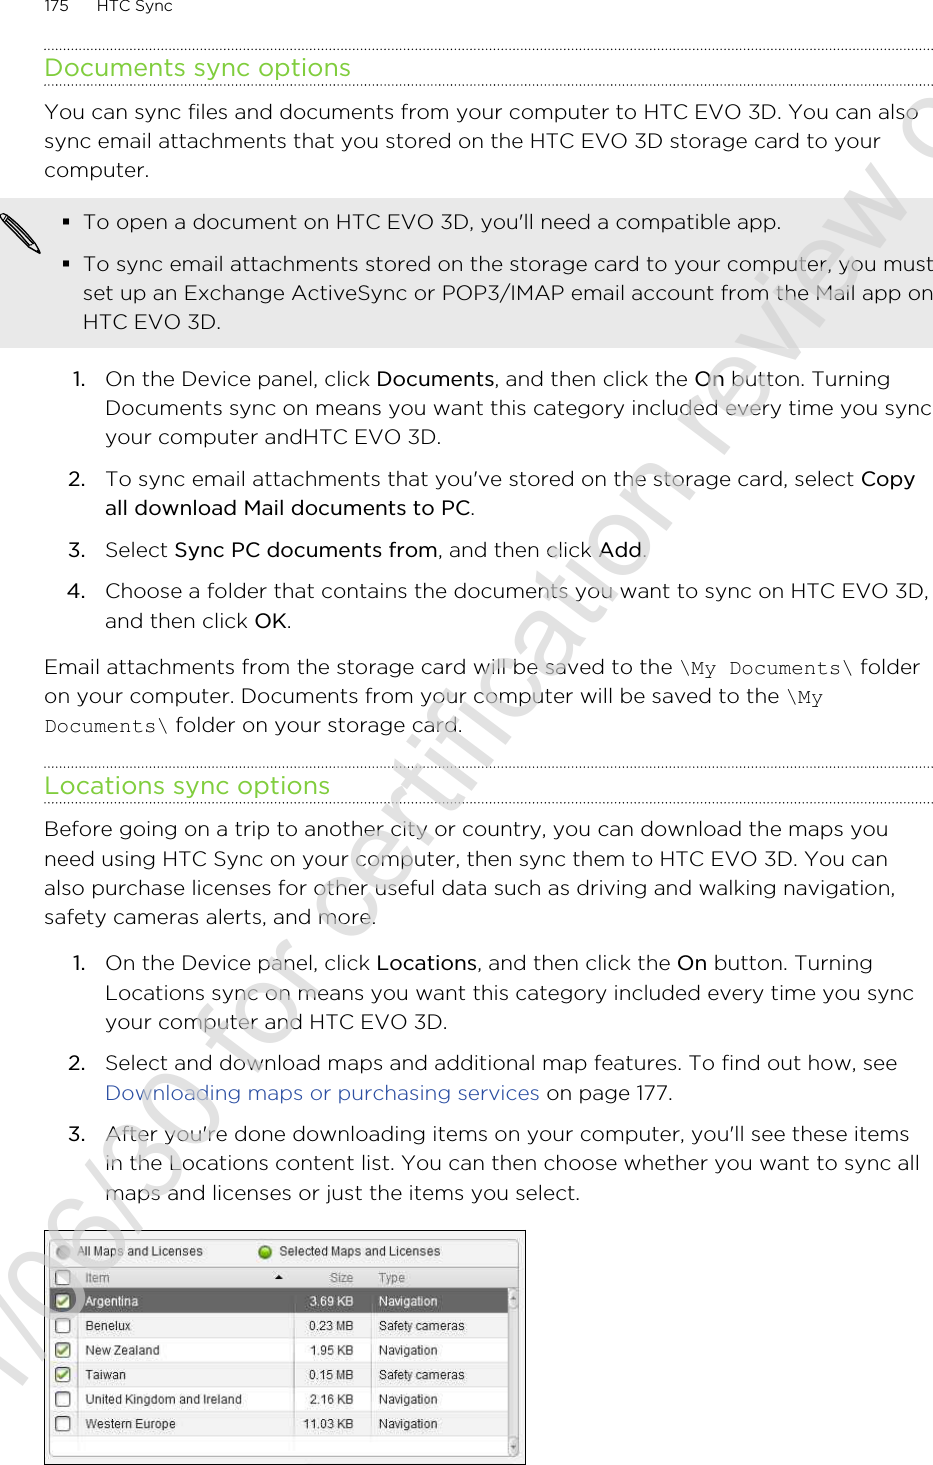 Documents sync optionsYou can sync files and documents from your computer to HTC EVO 3D. You can alsosync email attachments that you stored on the HTC EVO 3D storage card to yourcomputer.§To open a document on HTC EVO 3D, you&apos;ll need a compatible app.§To sync email attachments stored on the storage card to your computer, you mustset up an Exchange ActiveSync or POP3/IMAP email account from the Mail app onHTC EVO 3D.1. On the Device panel, click Documents, and then click the On button. TurningDocuments sync on means you want this category included every time you syncyour computer andHTC EVO 3D.2. To sync email attachments that you&apos;ve stored on the storage card, select Copyall download Mail documents to PC. 3. Select Sync PC documents from, and then click Add.4. Choose a folder that contains the documents you want to sync on HTC EVO 3D,and then click OK.Email attachments from the storage card will be saved to the \My Documents\ folderon your computer. Documents from your computer will be saved to the \MyDocuments\ folder on your storage card.Locations sync optionsBefore going on a trip to another city or country, you can download the maps youneed using HTC Sync on your computer, then sync them to HTC EVO 3D. You canalso purchase licenses for other useful data such as driving and walking navigation,safety cameras alerts, and more.1. On the Device panel, click Locations, and then click the On button. TurningLocations sync on means you want this category included every time you syncyour computer and HTC EVO 3D.2. Select and download maps and additional map features. To find out how, see Downloading maps or purchasing services on page 177.3. After you&apos;re done downloading items on your computer, you&apos;ll see these itemsin the Locations content list. You can then choose whether you want to sync allmaps and licenses or just the items you select.175 HTC Sync2011/06/30 for certification review only